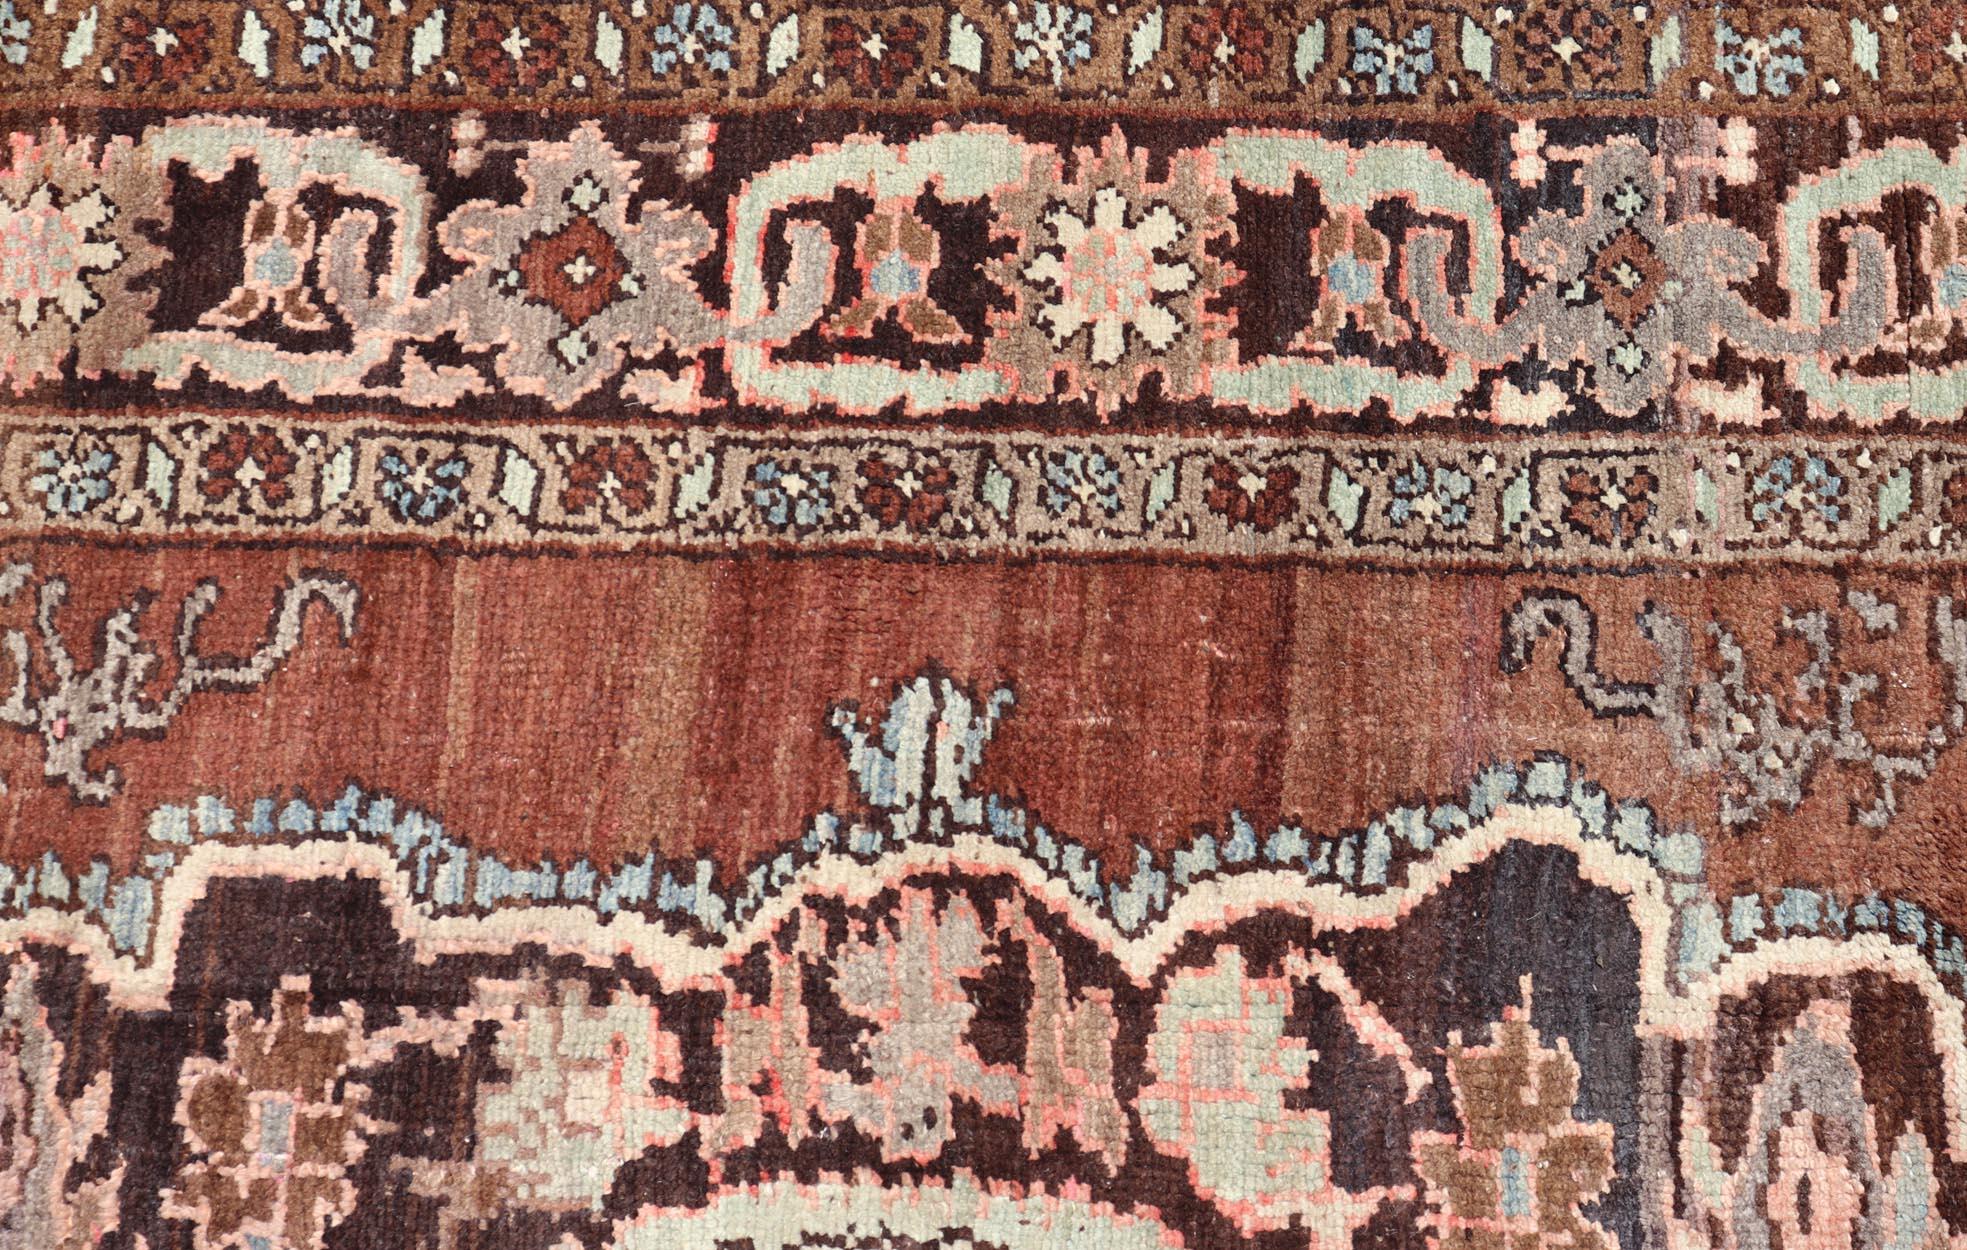 Turkish Kars Rug with Floral Medallion Design in Brown and Earthy Tones. Keivan Woven Arts / rug EN-141324, country of origin / type: Turkey / Oushak, circa mid-20th Century.
Measures: 8'8'' x 12'8''.
This beautiful Turkish carpet features an